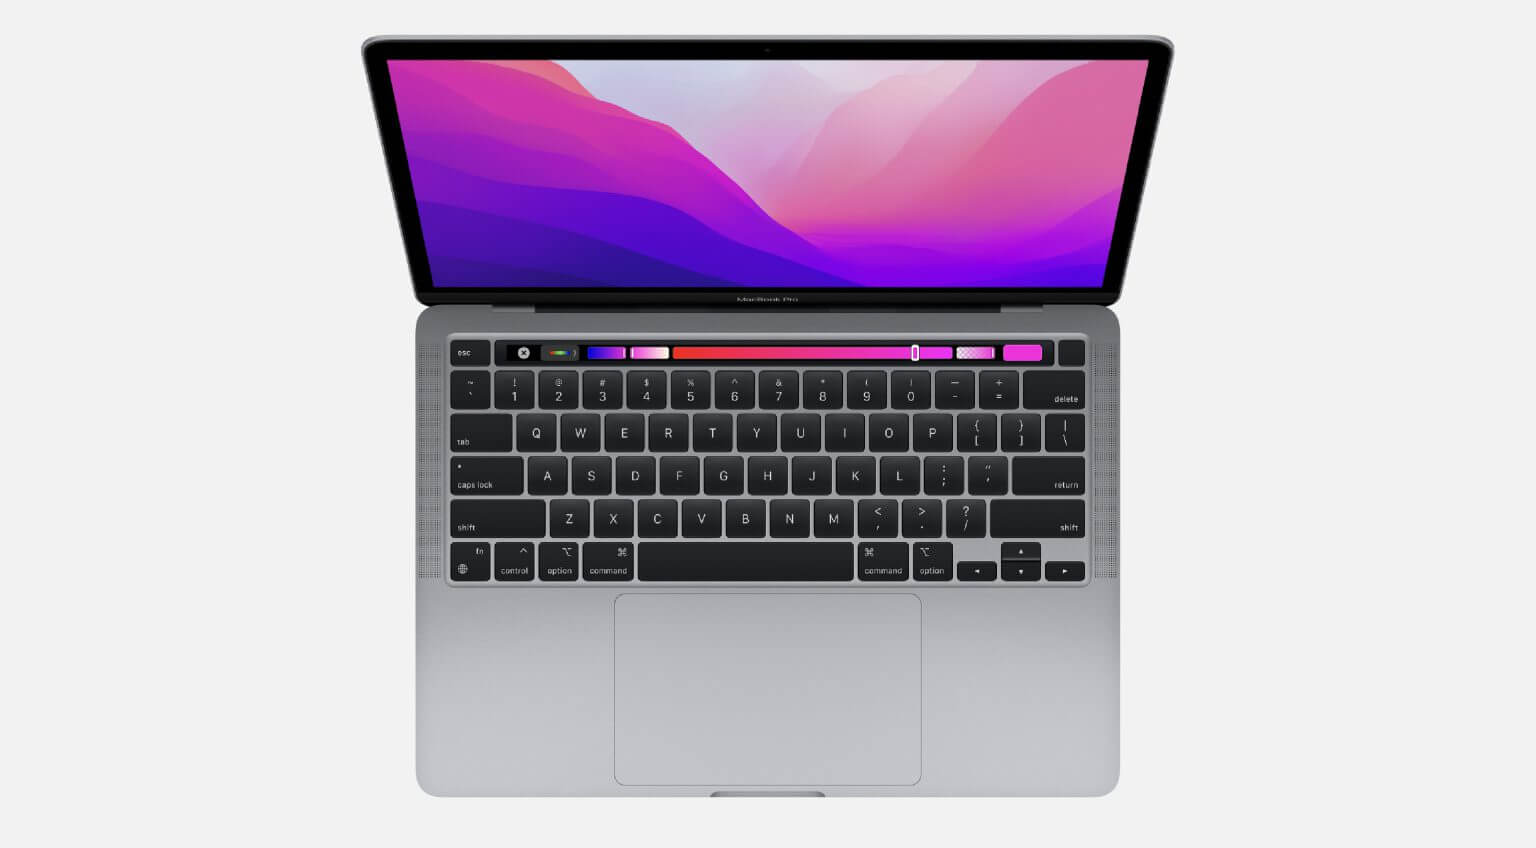 The 13-inch M2 MacBook Pro brings more power but doesn't have a design that's too bulky. It has a 10-core GPU, features a stylish touch bar and charges via USB-C. You'll find you get a slightly longer battery life than the M2 air too.